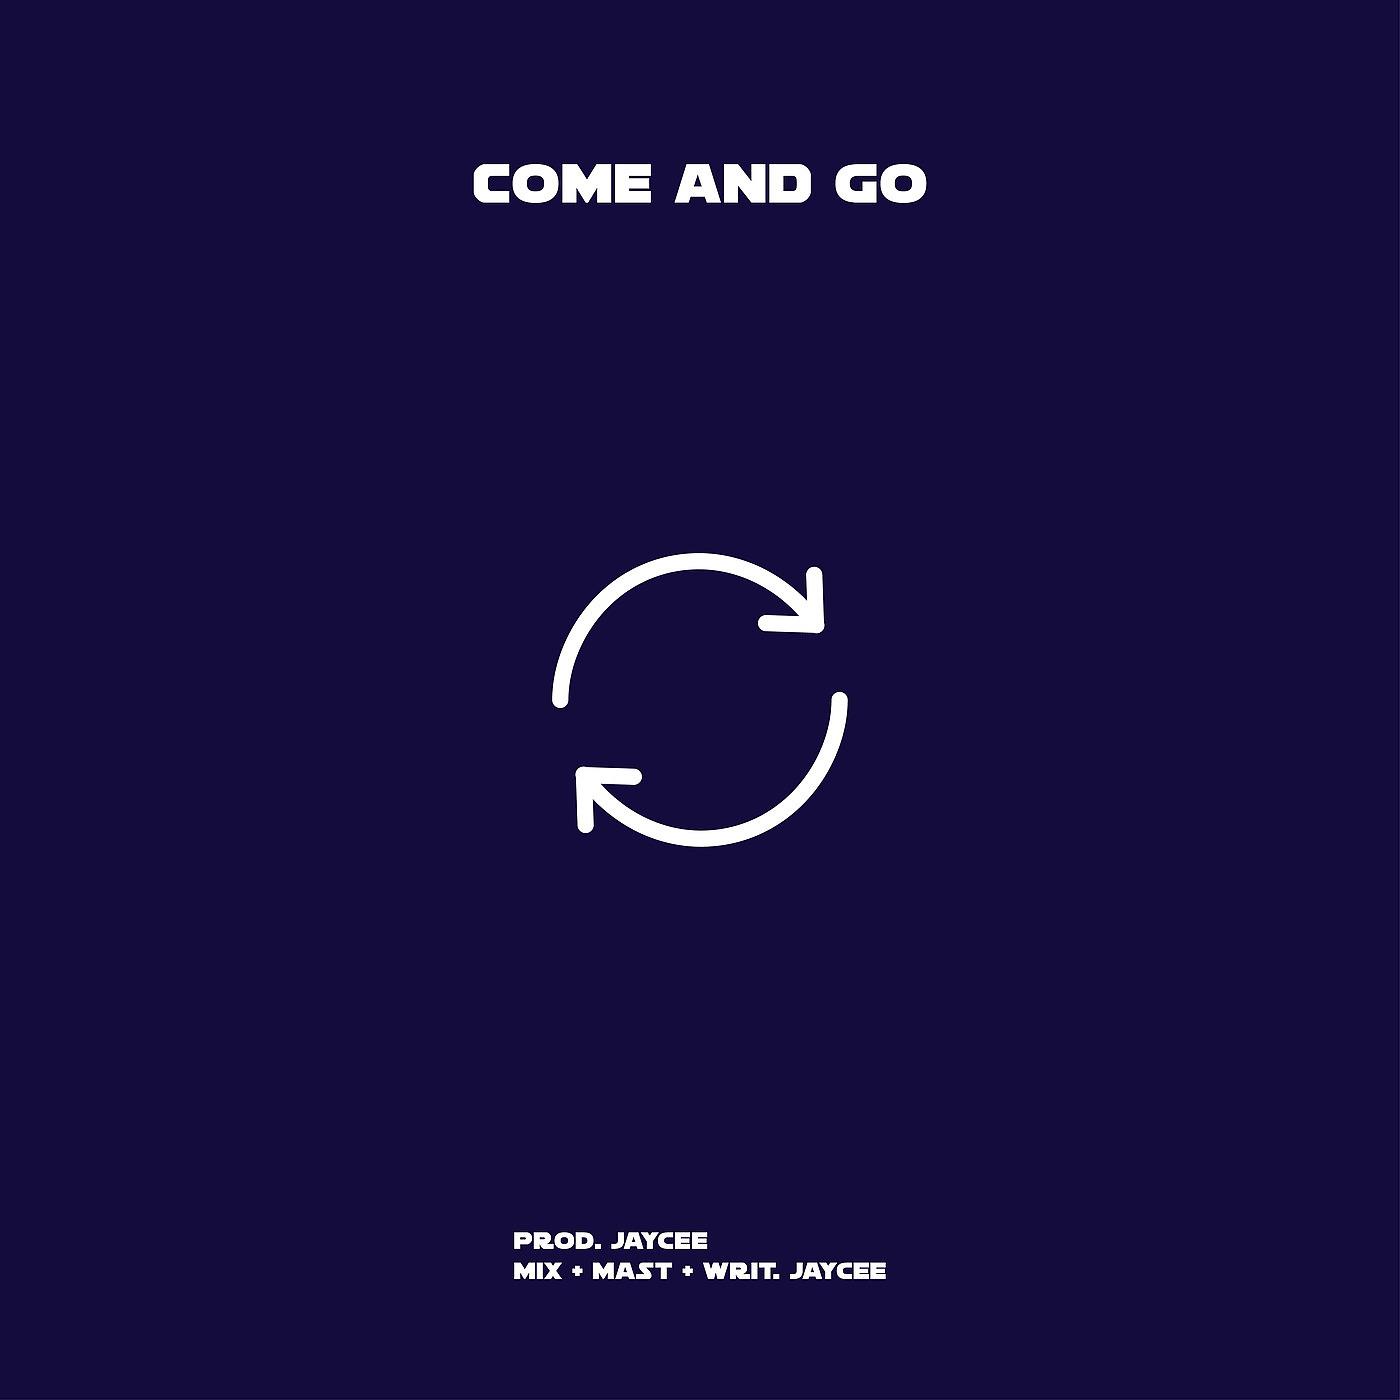 Baby come to me remix. Q5 - come and gone. Come and go. Bitches come and go ремикс. Come go слушать онлайн бесплатно.